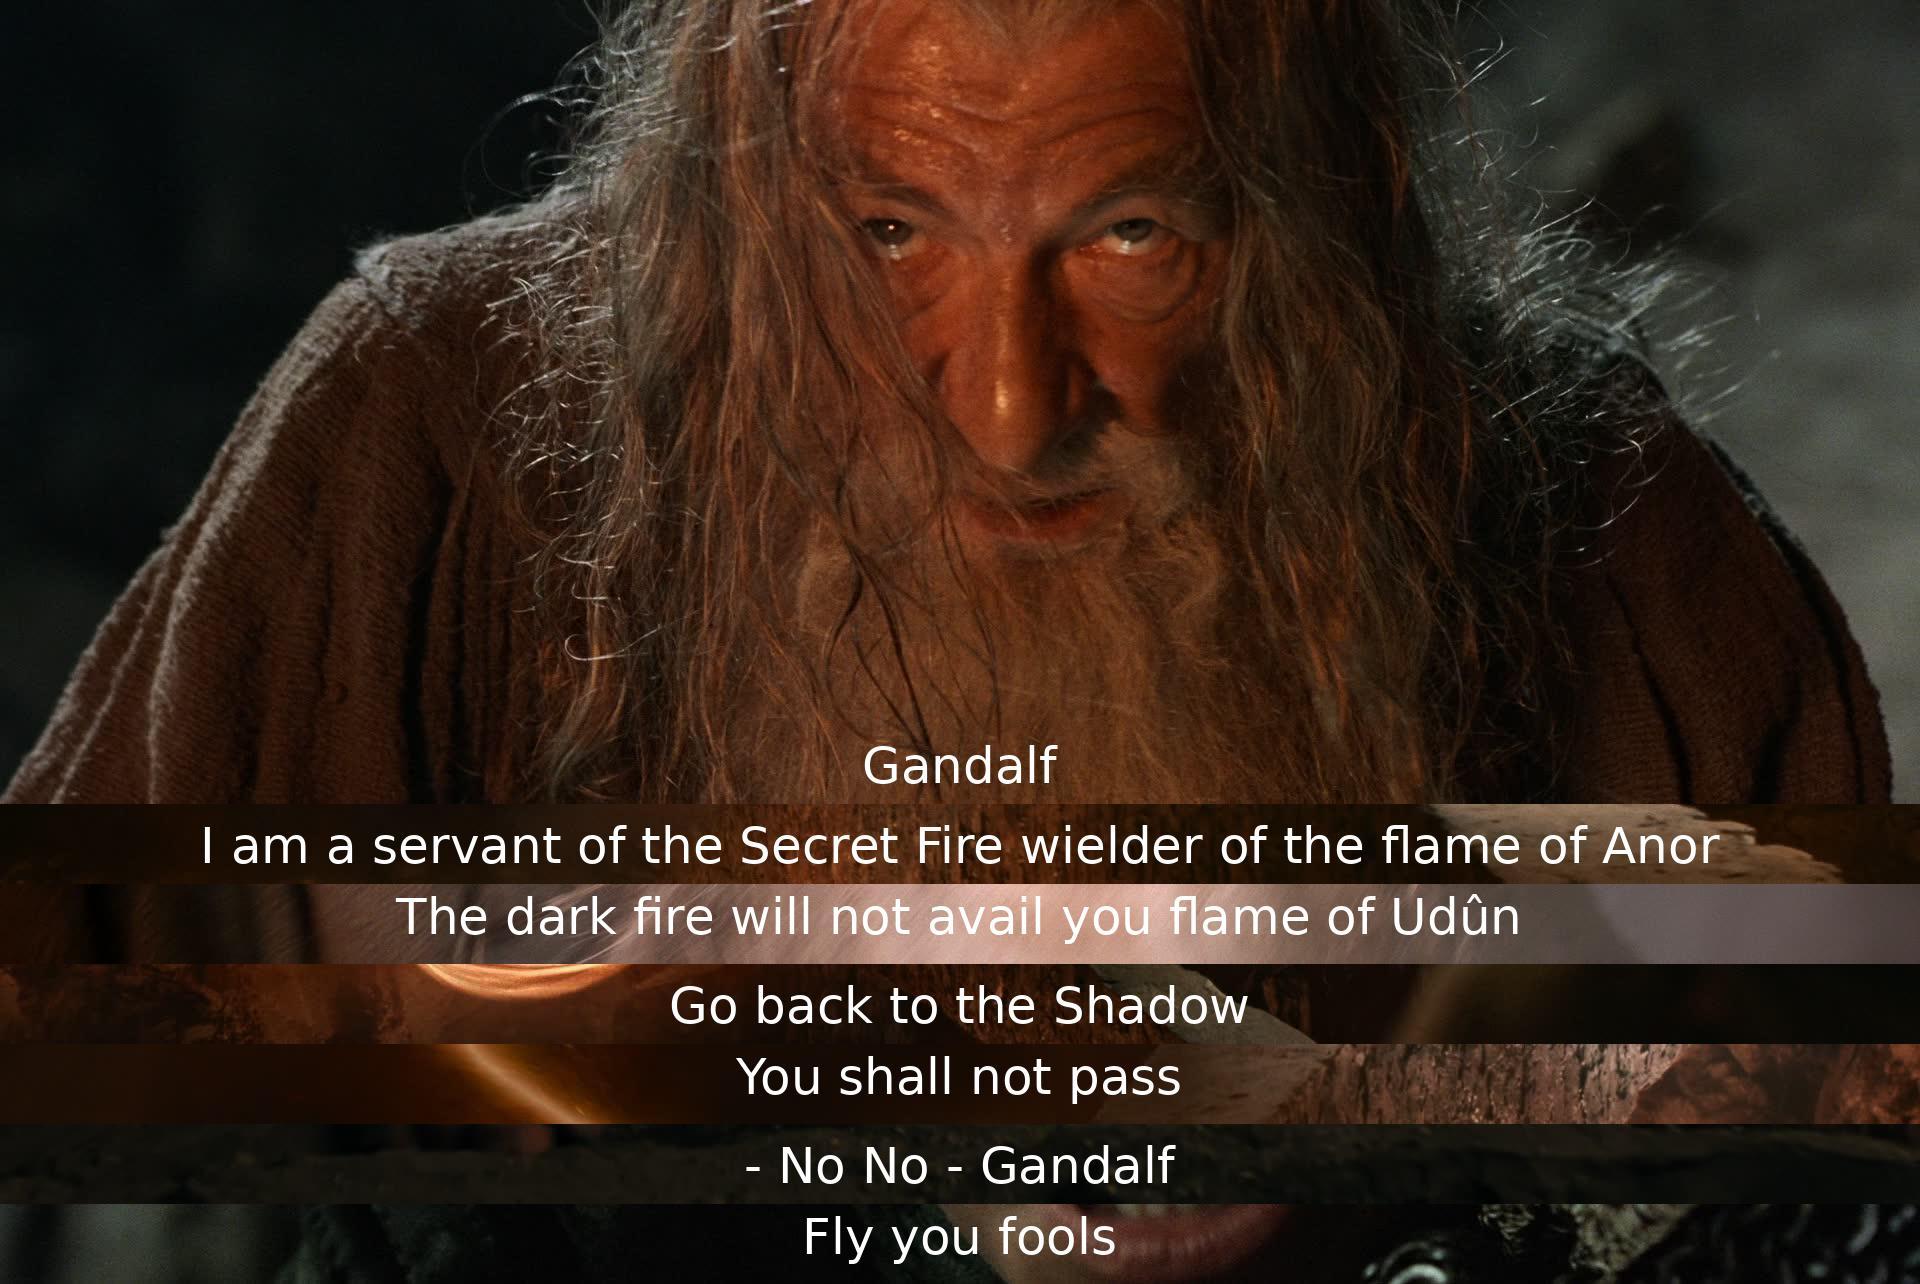 In a critical moment, Gandalf confronts a powerful foe, blocking their way with fiery determination. Despite facing great danger, he commands them to retreat to darkness, declaring "You shall not pass" before meeting a dramatic fate, urging his companions to "Fly, you fools."